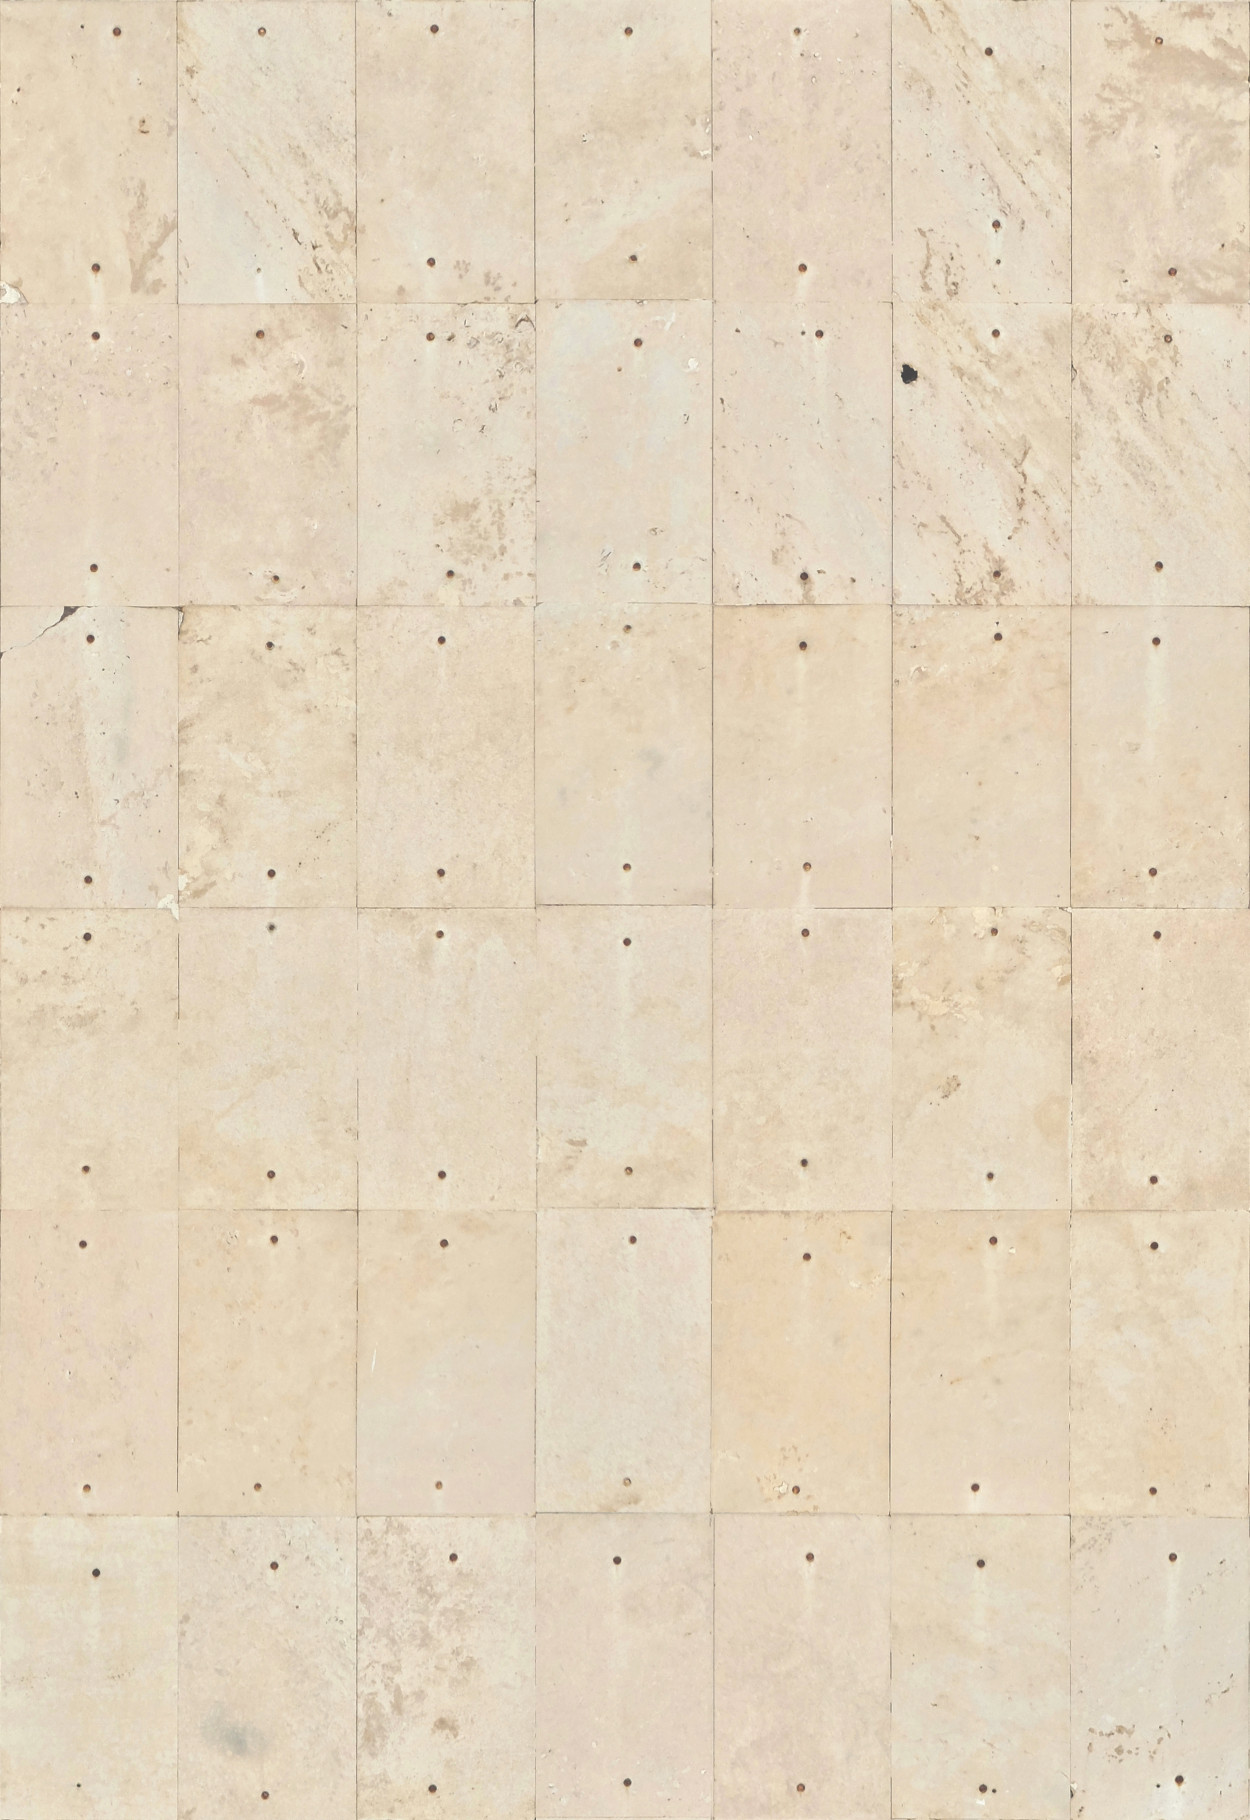 A seamless stone veneer cladding texture for use in architectural drawings and 3D models